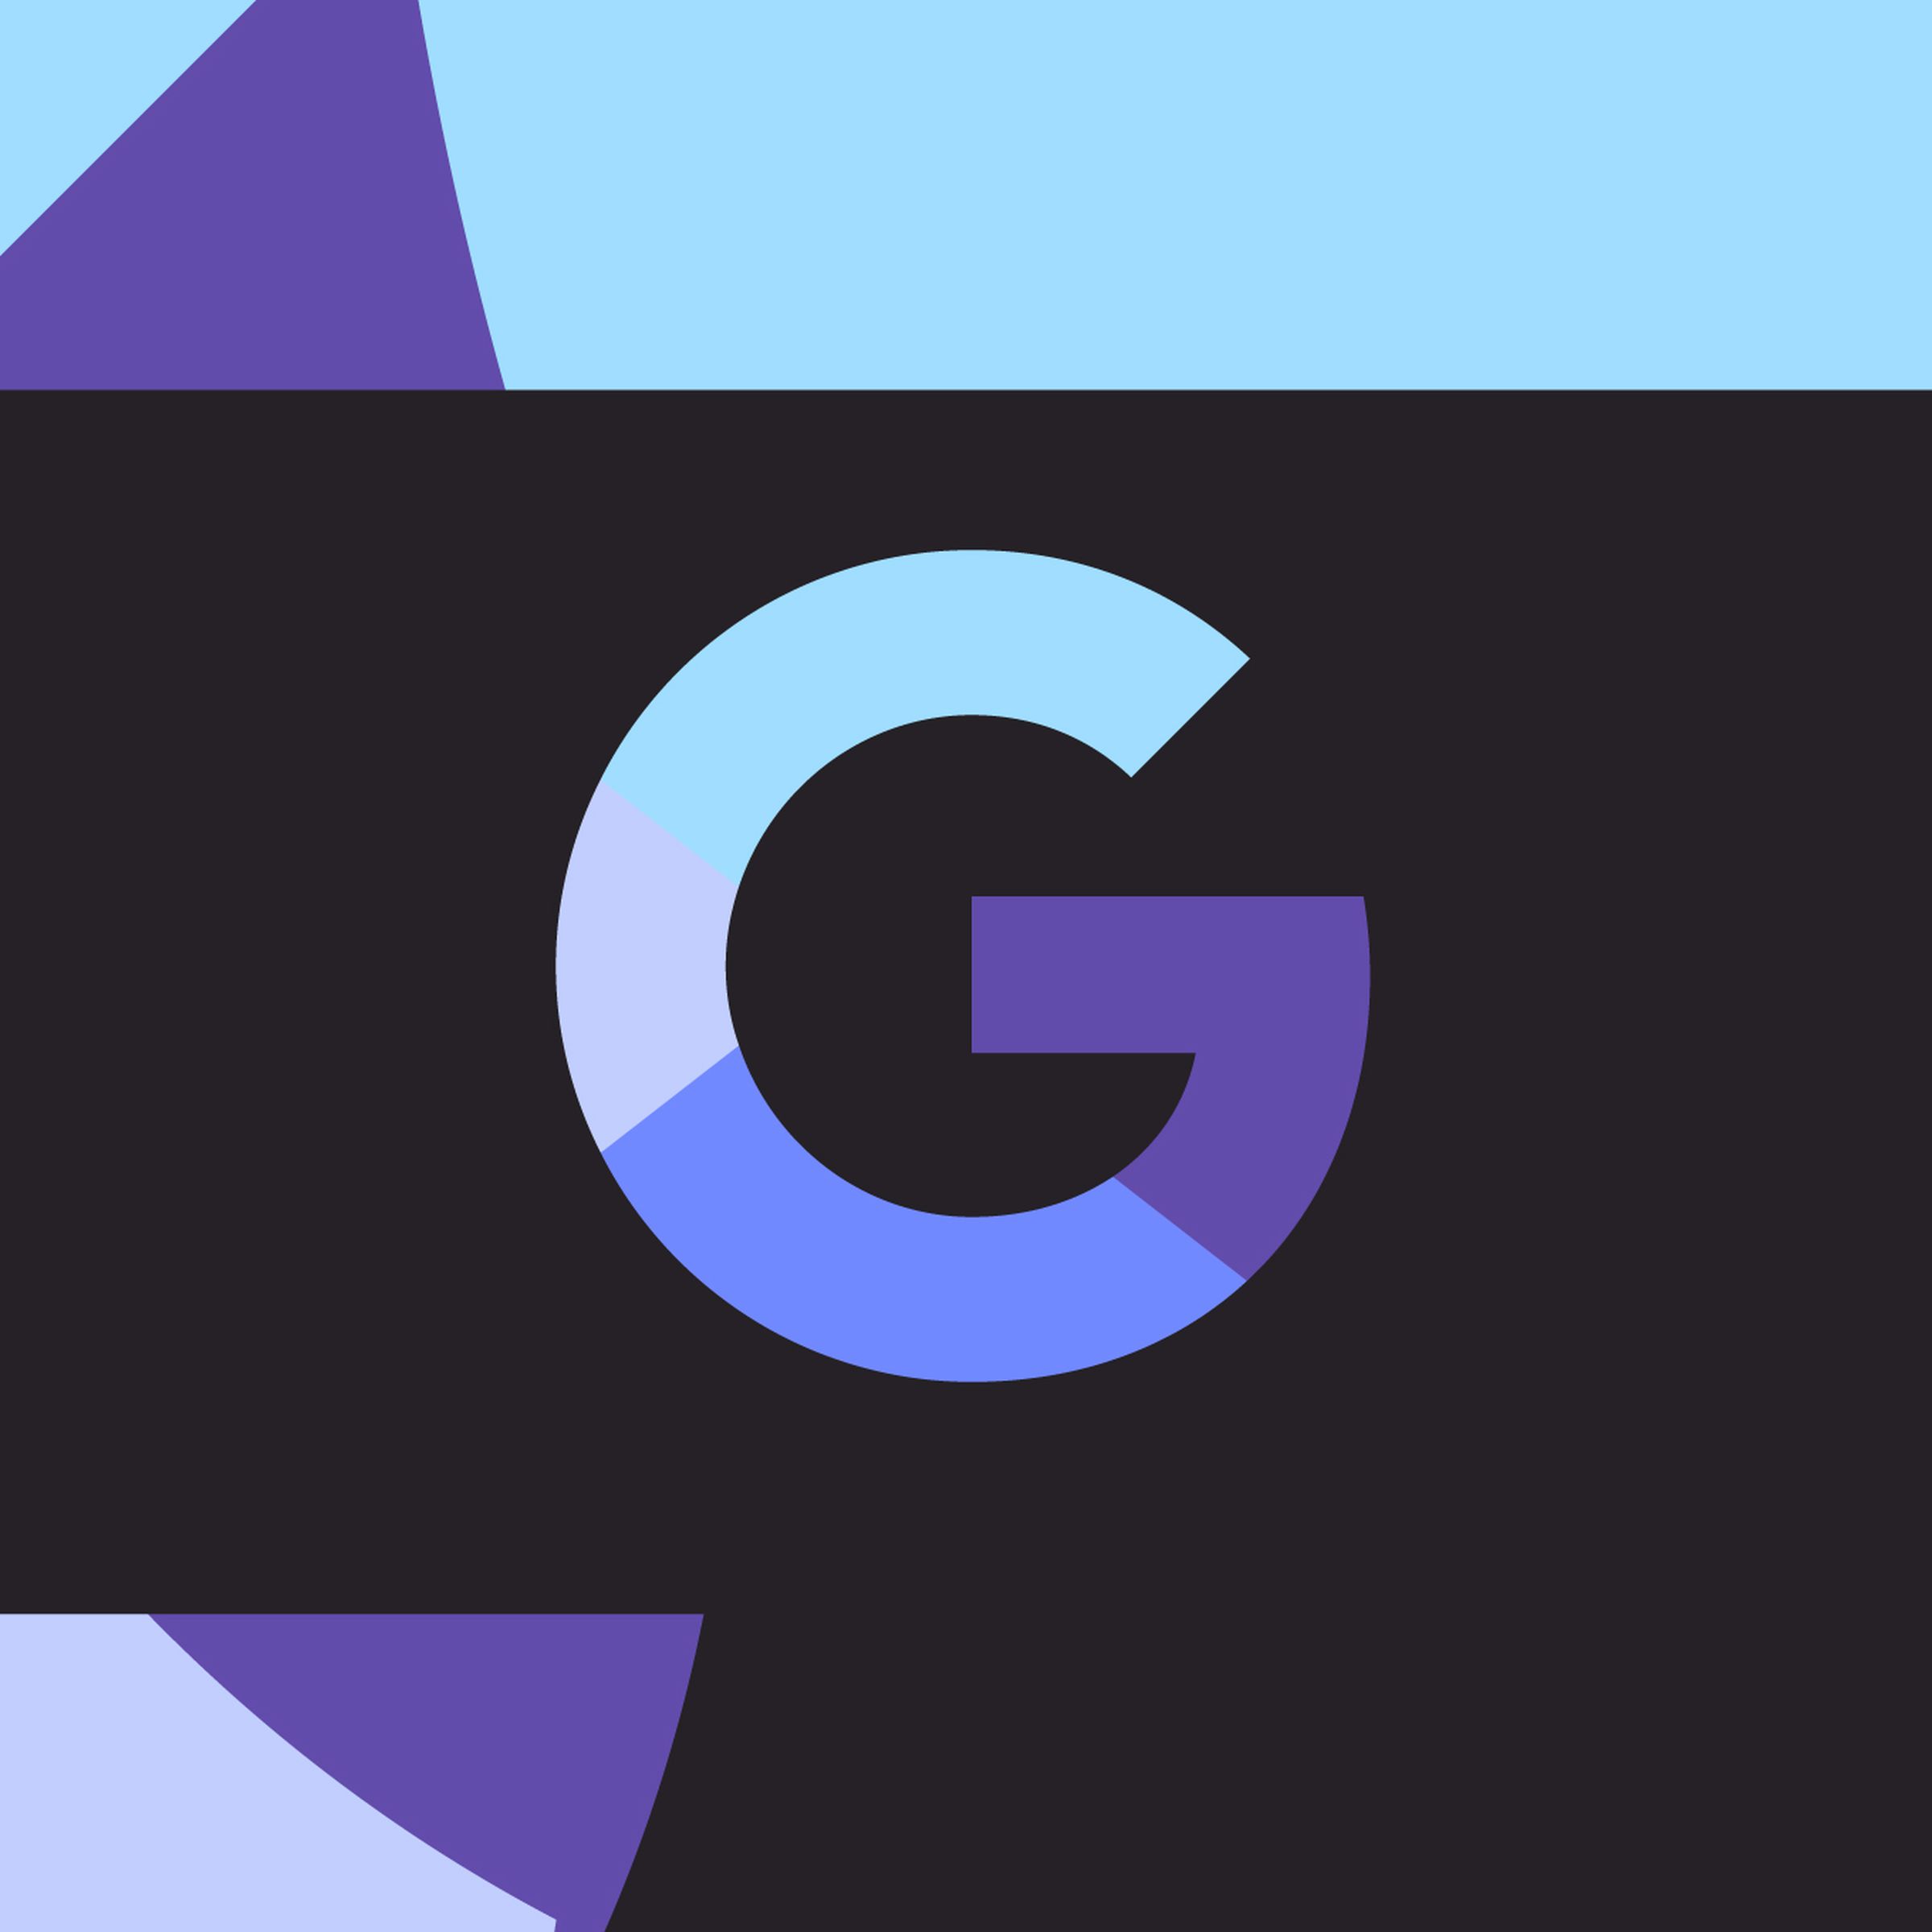 Image of the Google “G” logo on a blue, black, and purple background.